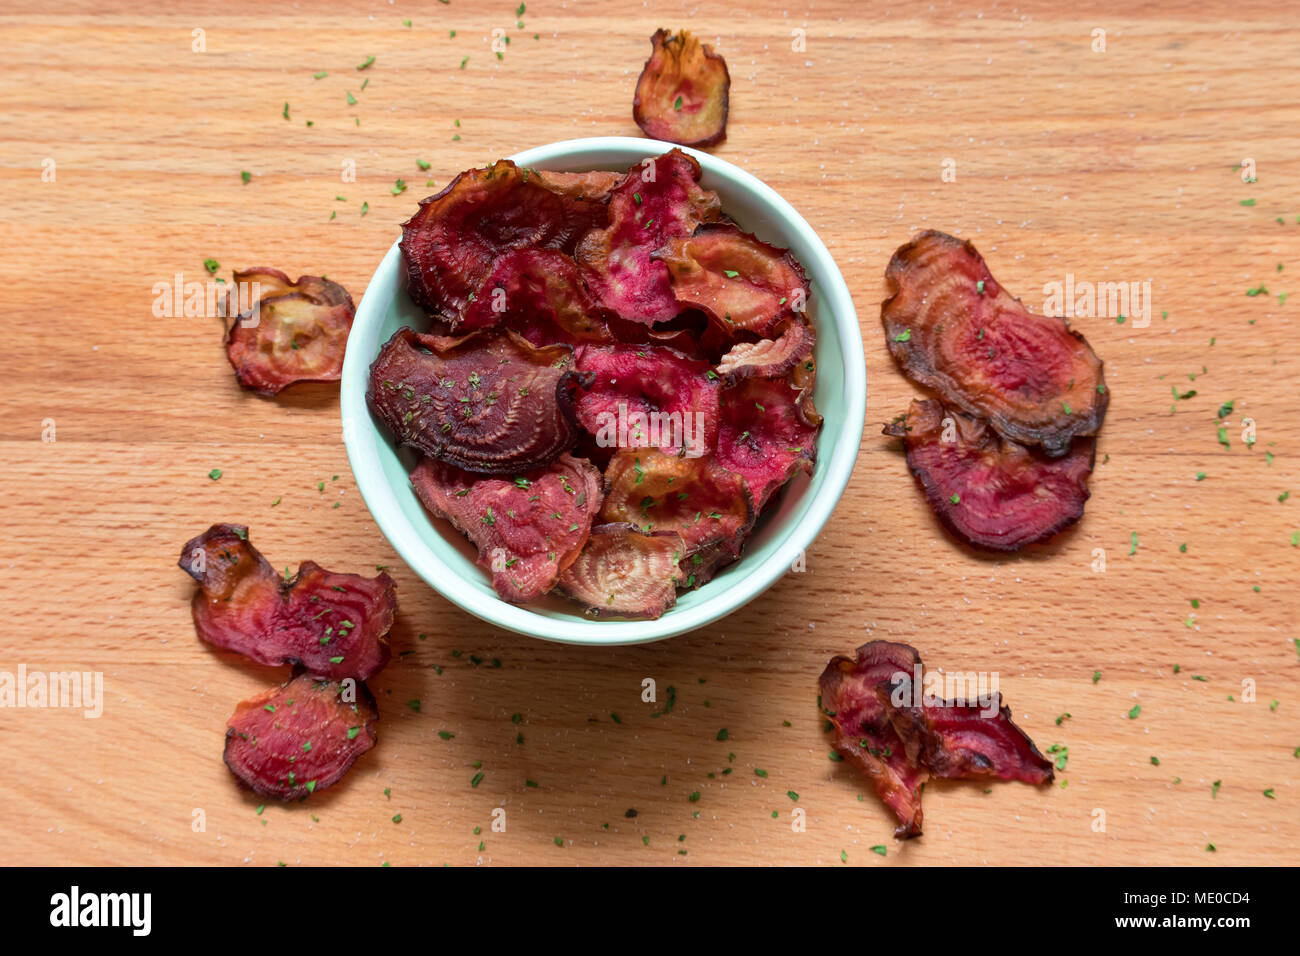 Roasted vegetable chips. These oven-baked candy beetroot crisps are a great healthy snack. Stock Photo